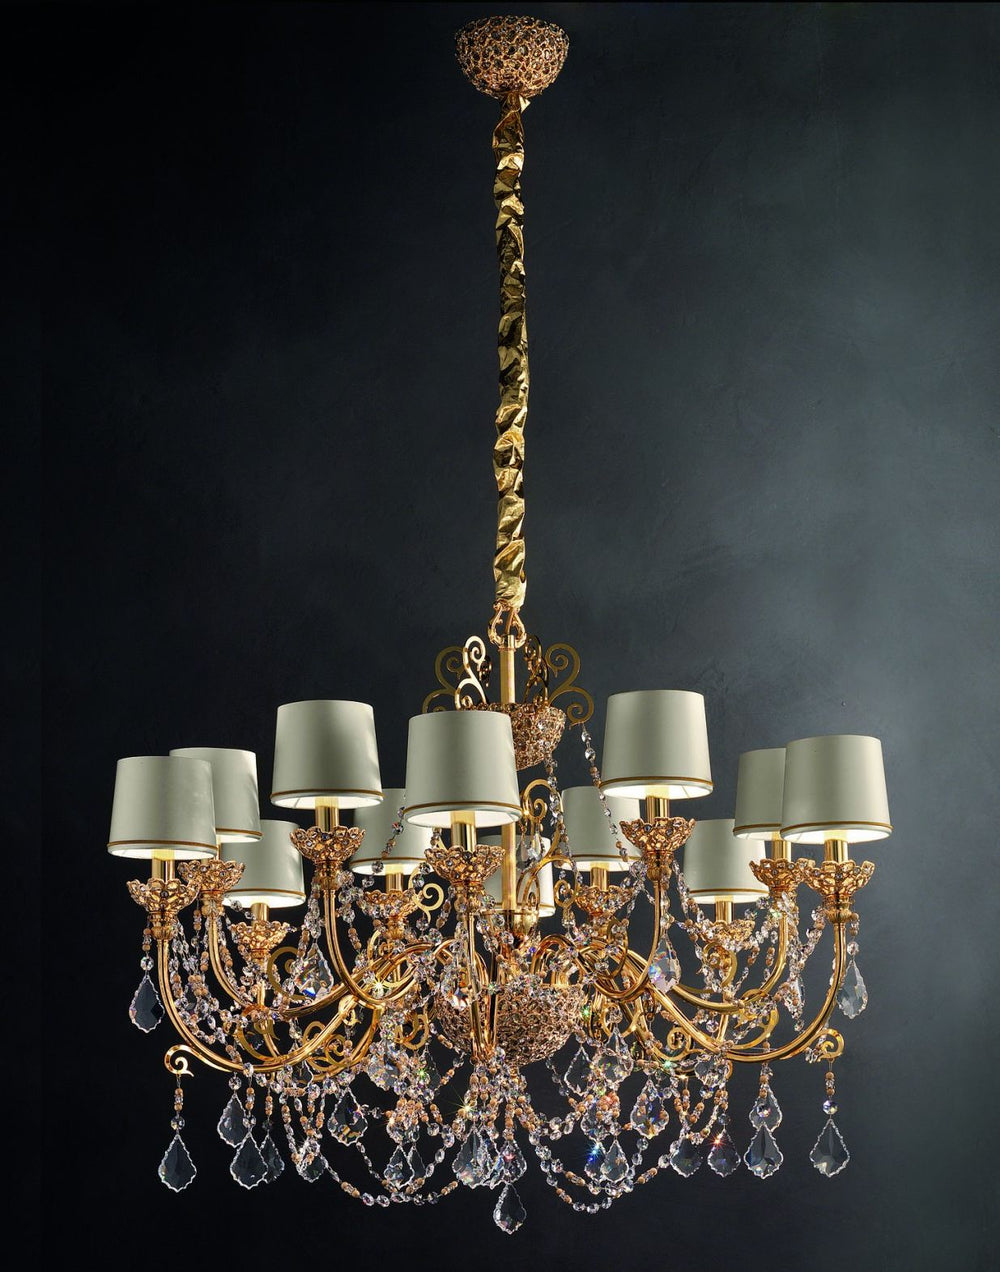 A lovely traditional 12-light crystal-encrusted Italian chandelier with premium pendants